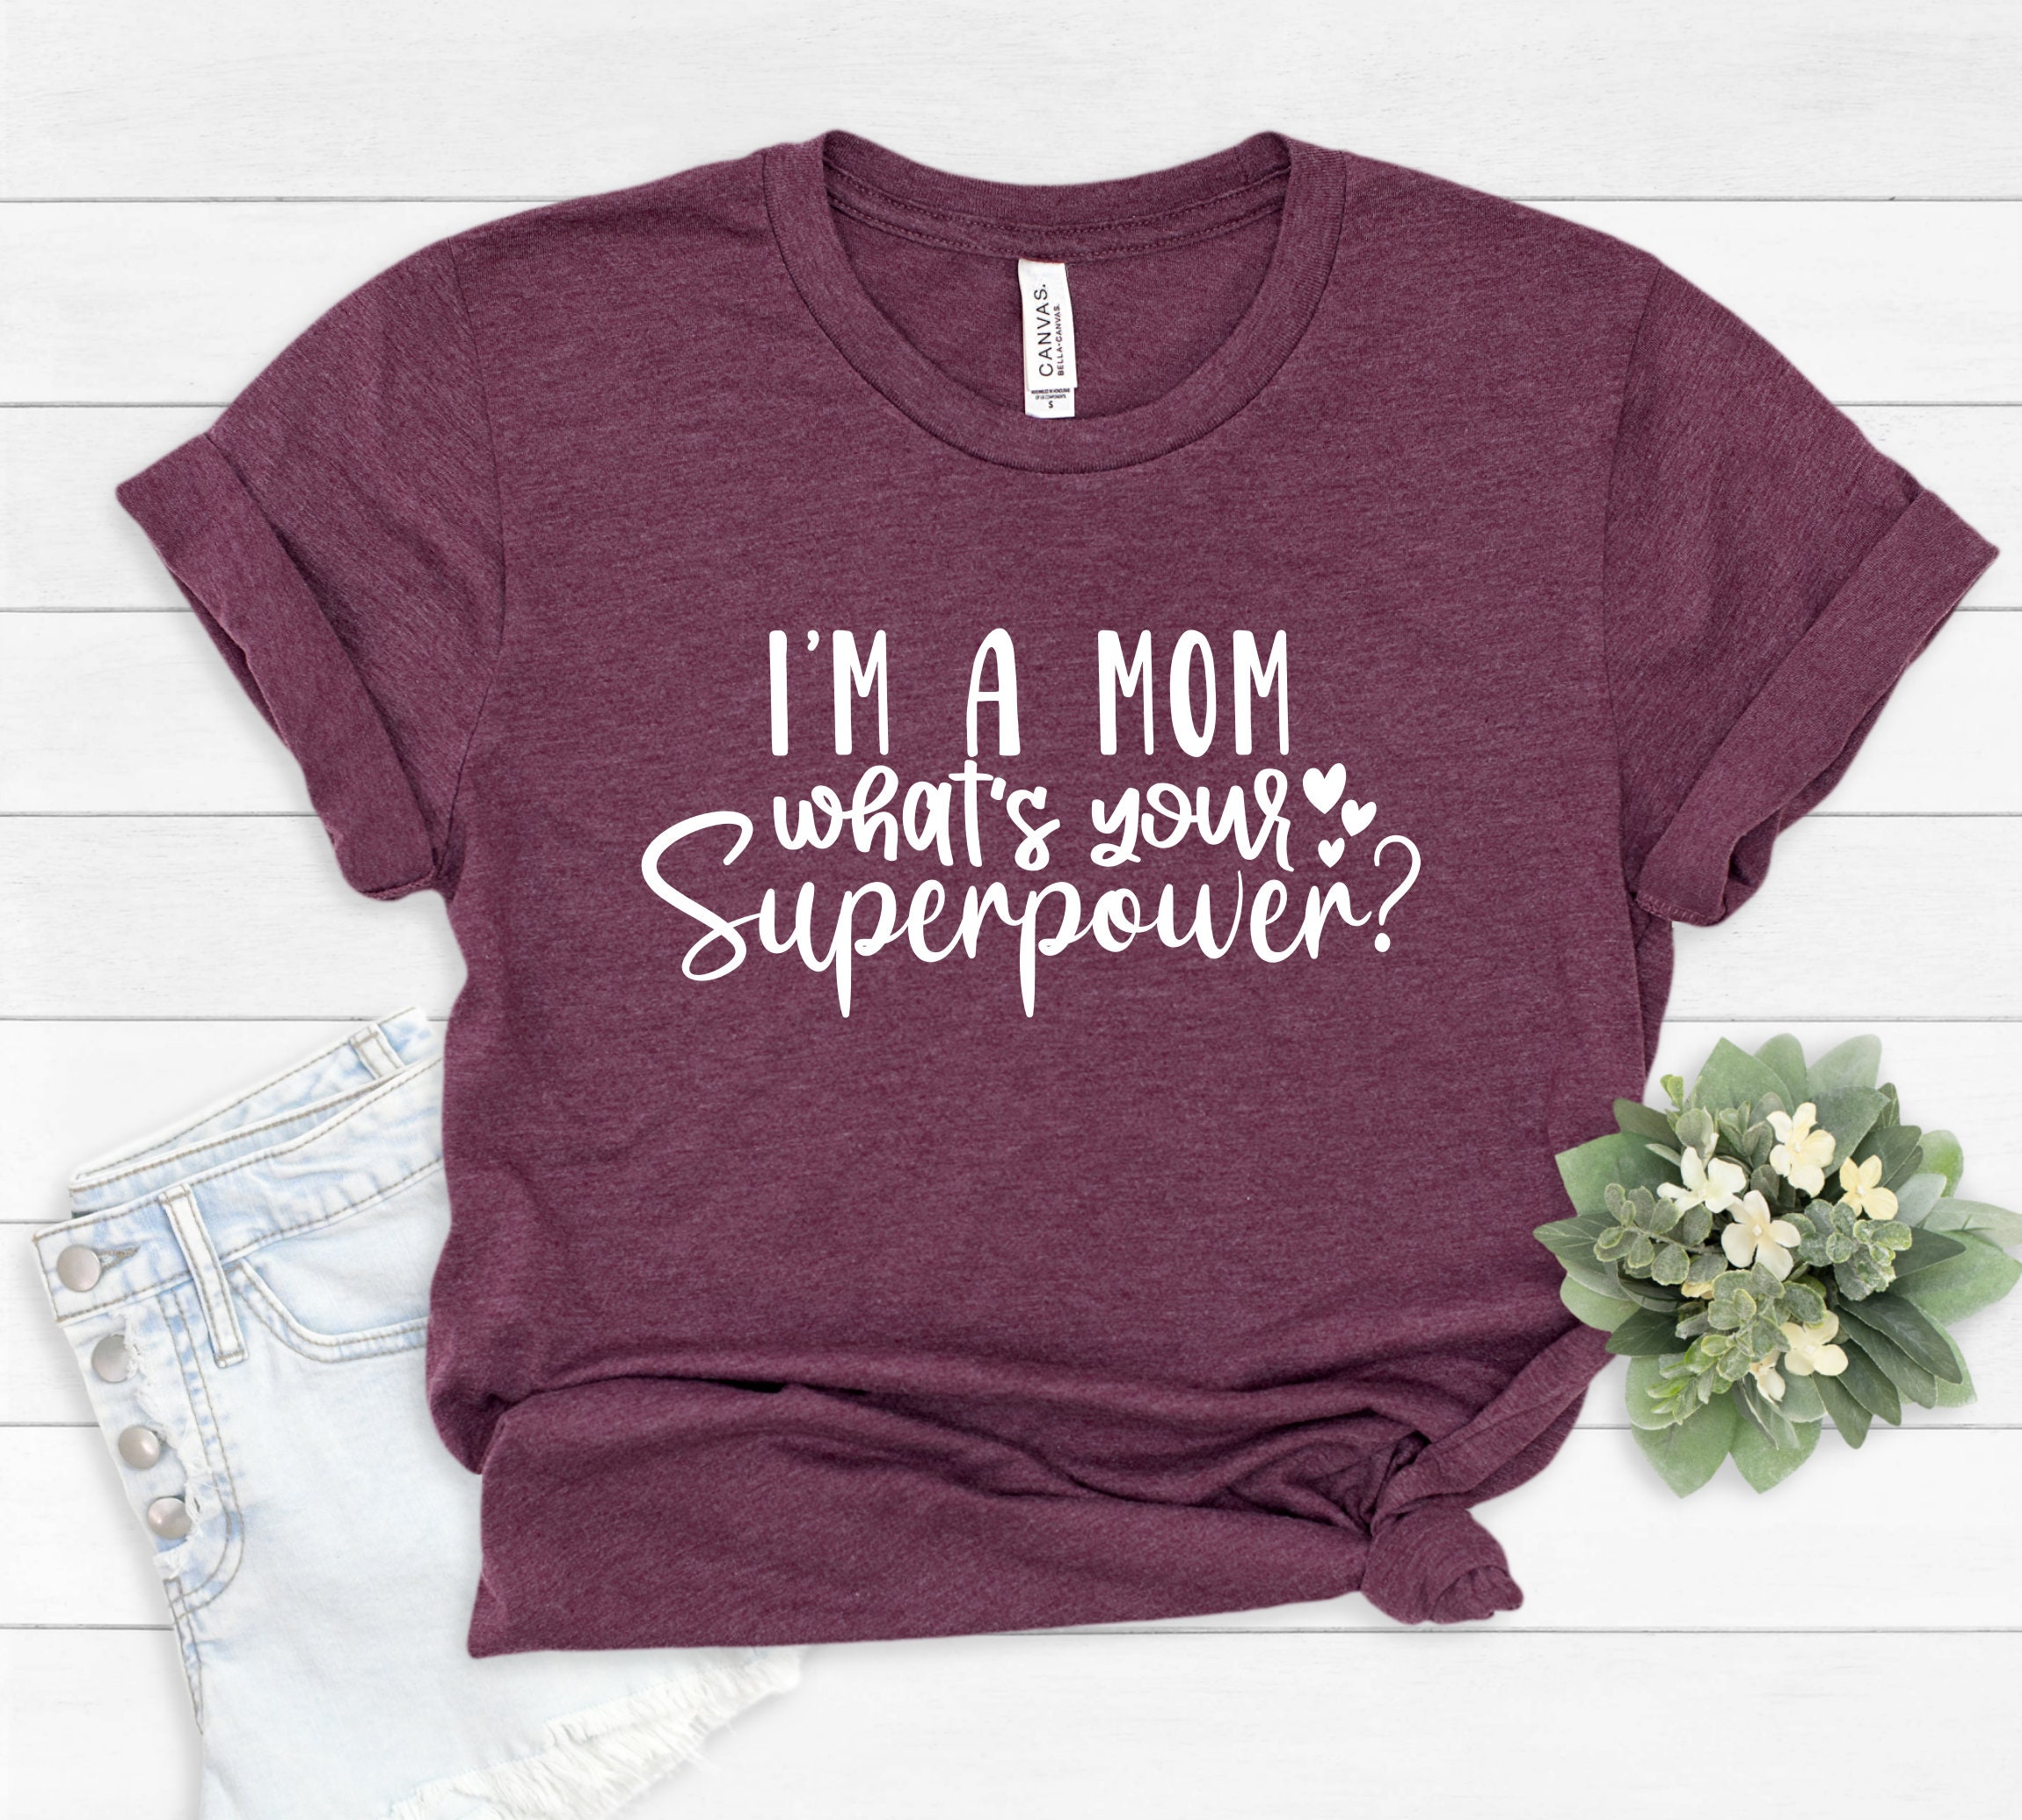 I Am a Mom What is Your Superpower Shirt, Cute Mom Shirt, Gift for Mothers, Superpower  Mom Shirt, Mother's Day Shirt, Gift for Her -  Canada